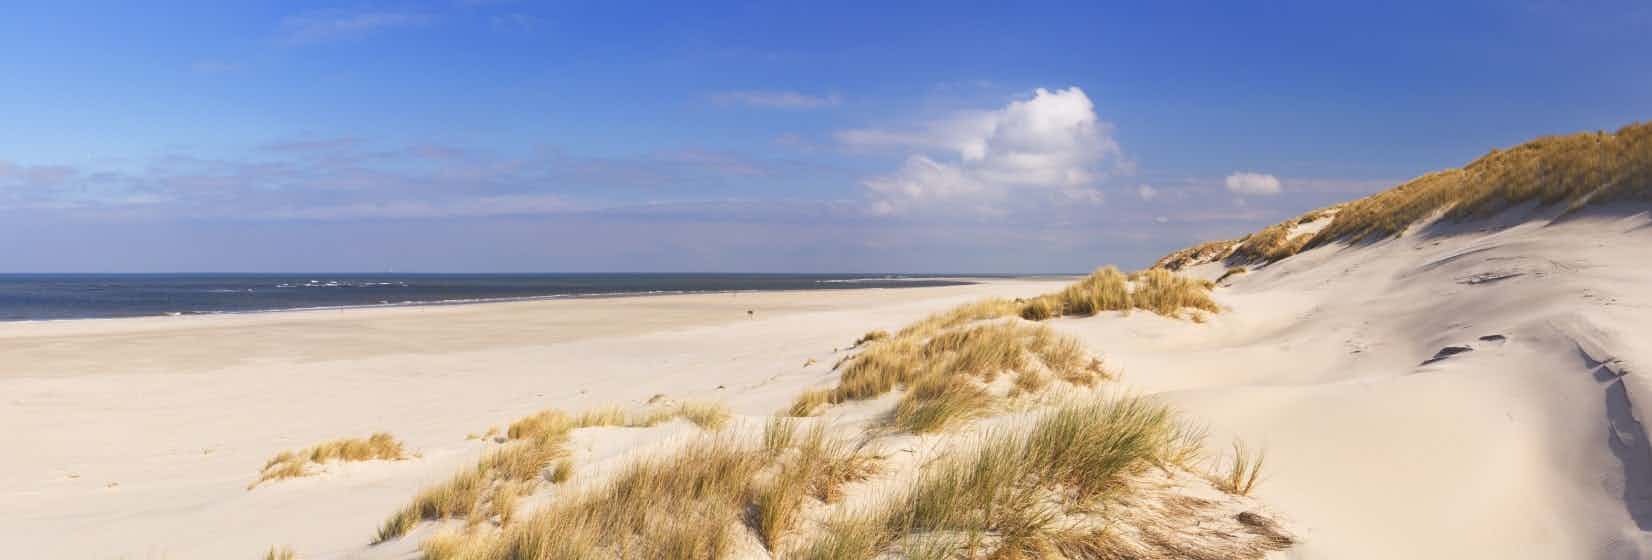 Camping am Meer in Holland